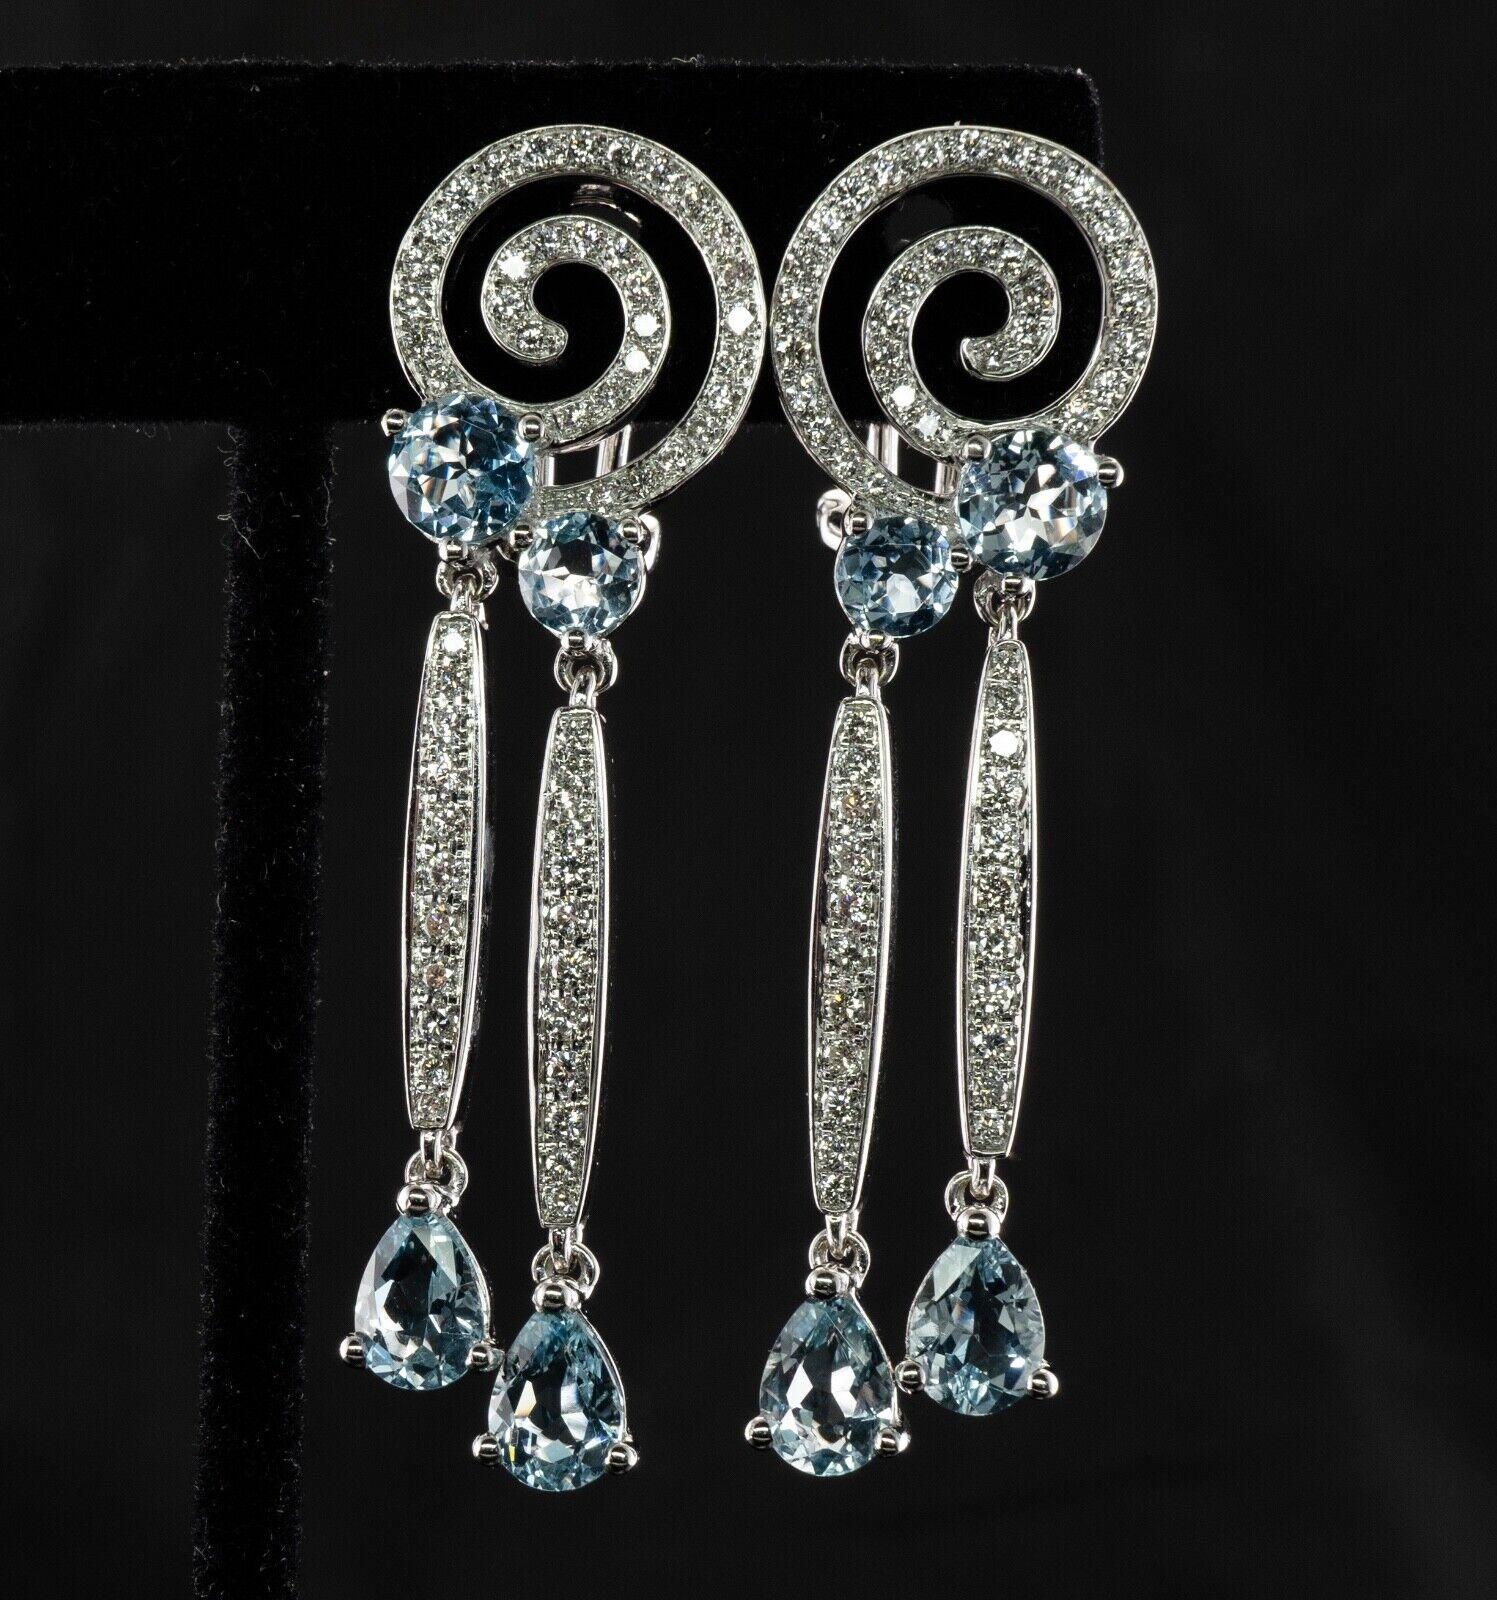 These gorgeous estate earrings are finely crafted in solid 18K White gold and also hallmarked with a symbol we can't recognize. They are set with natural Earth mined Aquamarines and diamonds. Two pear cut aquas in each earring measure 7mm x 5mm, two